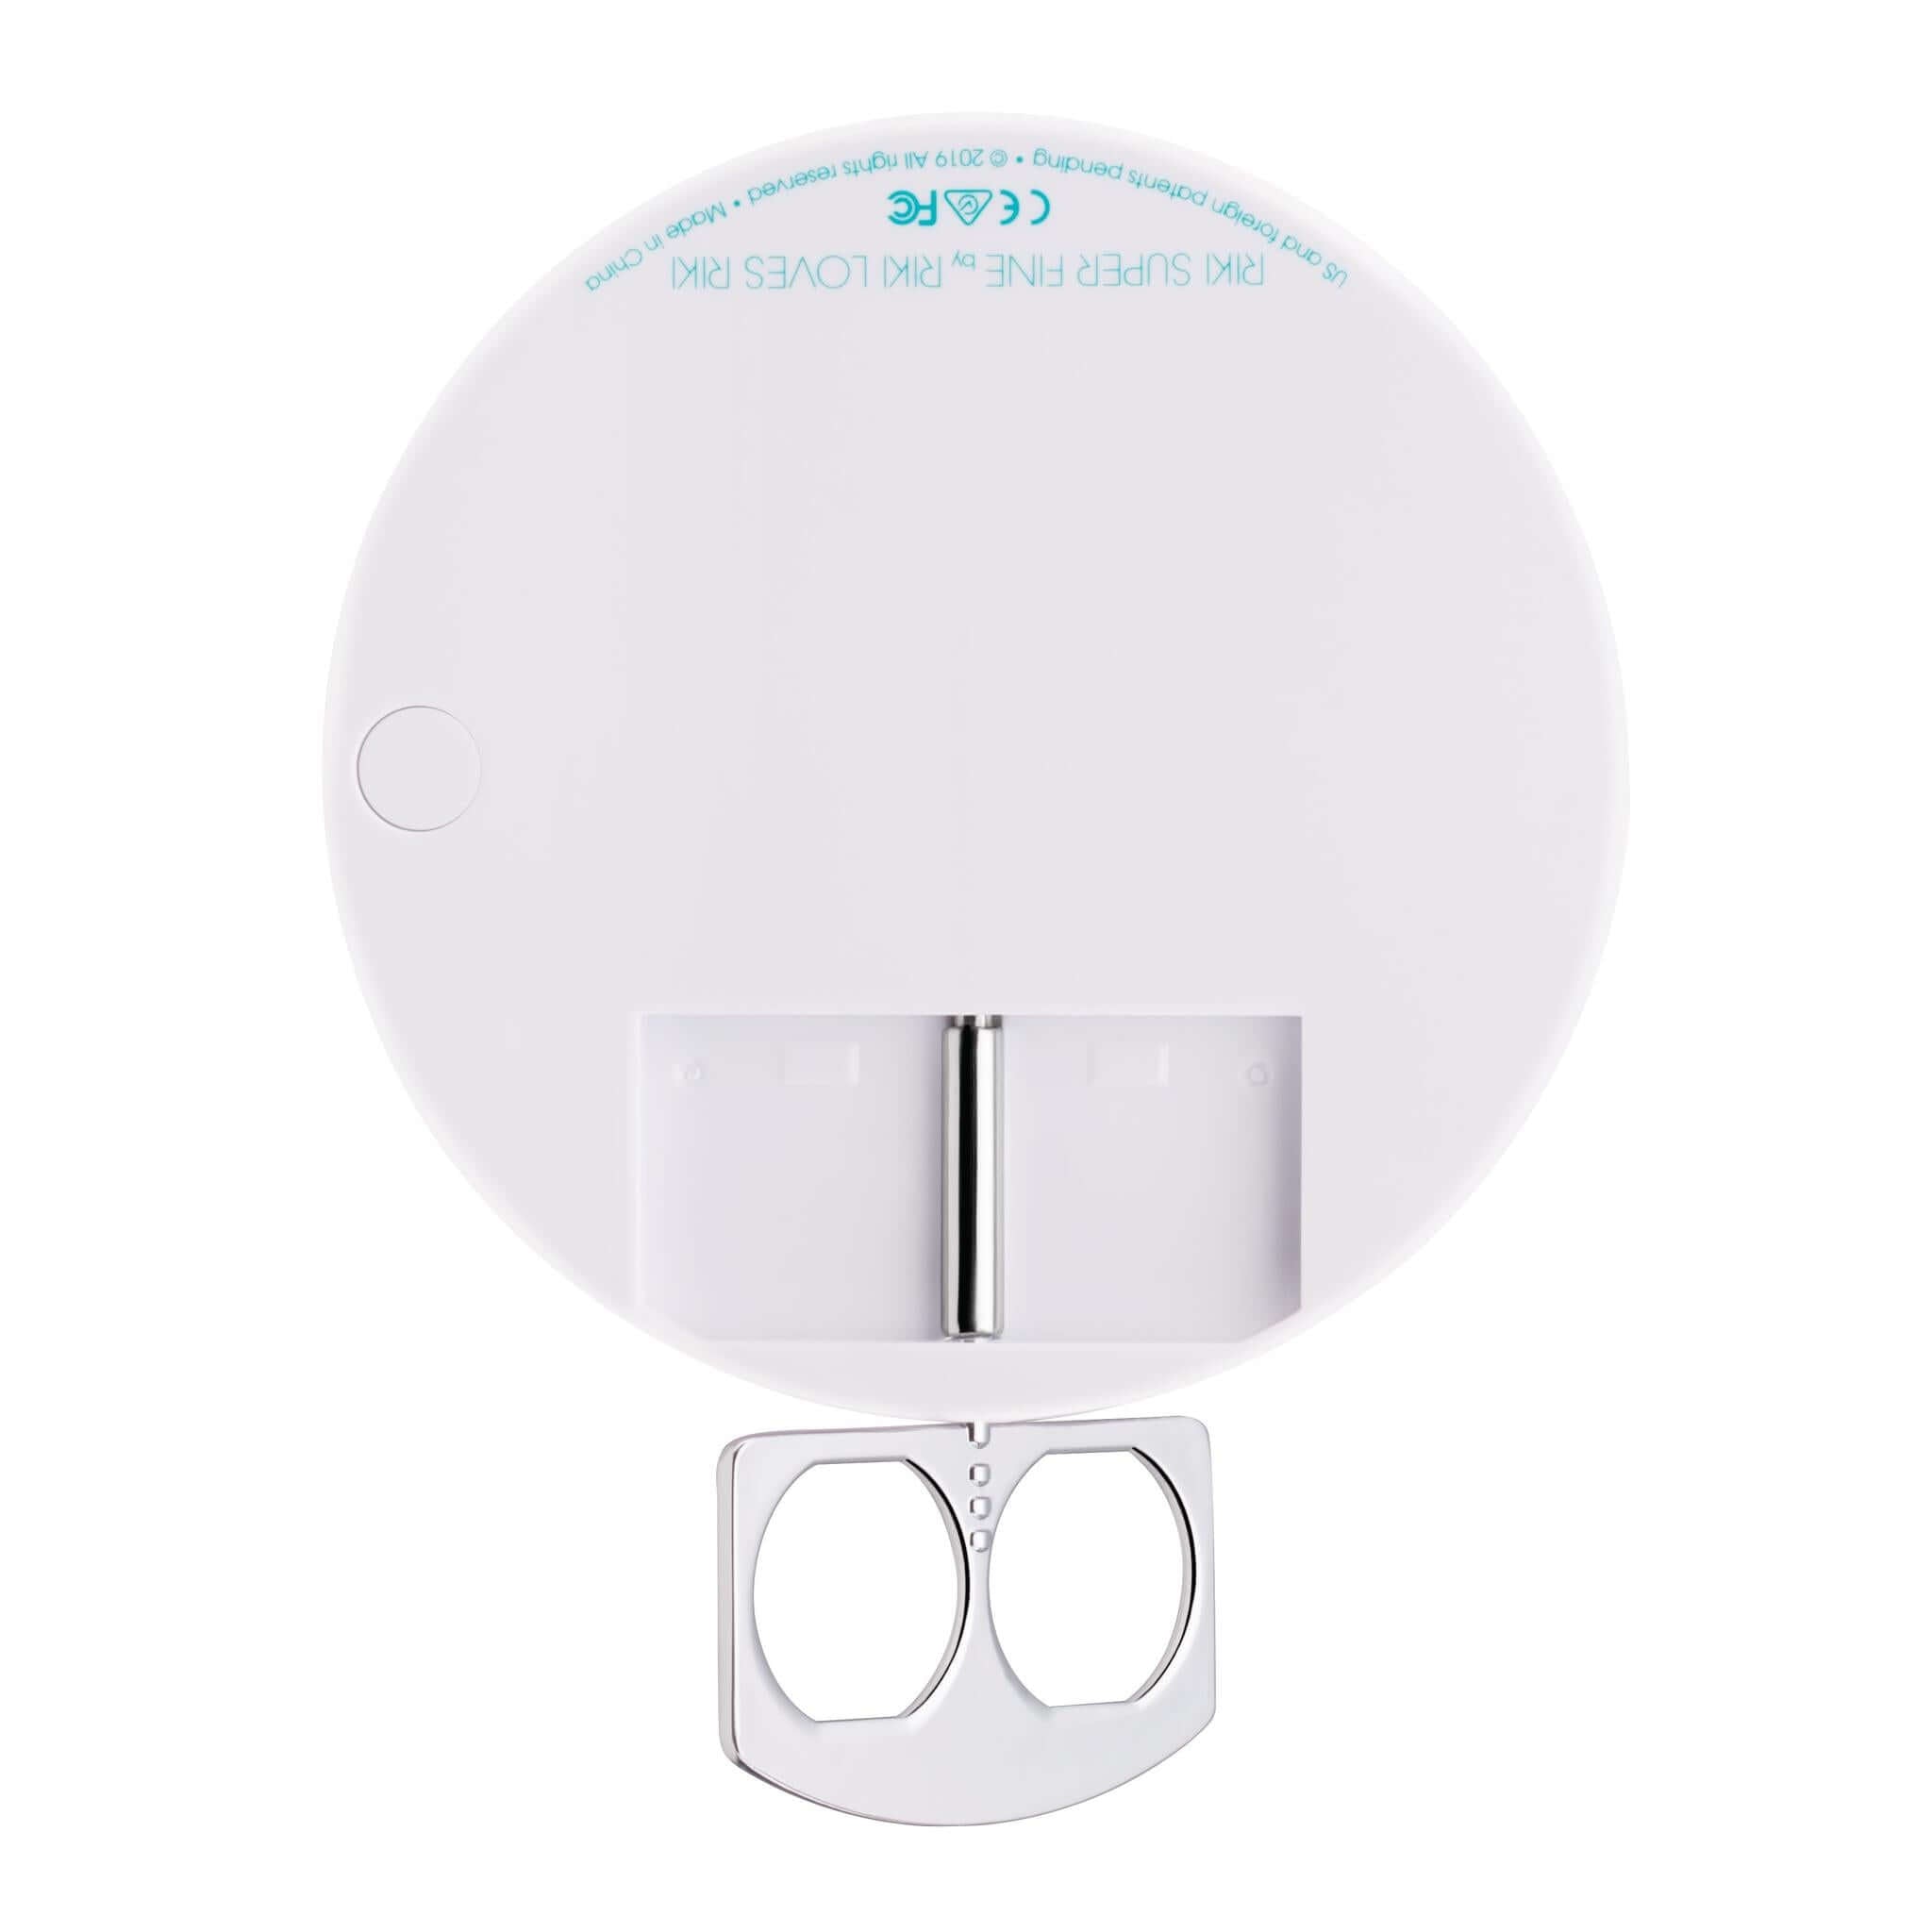 Shine bright with the RIKI SUPER FINE 7x Hands-Free Makeup Mirror in White